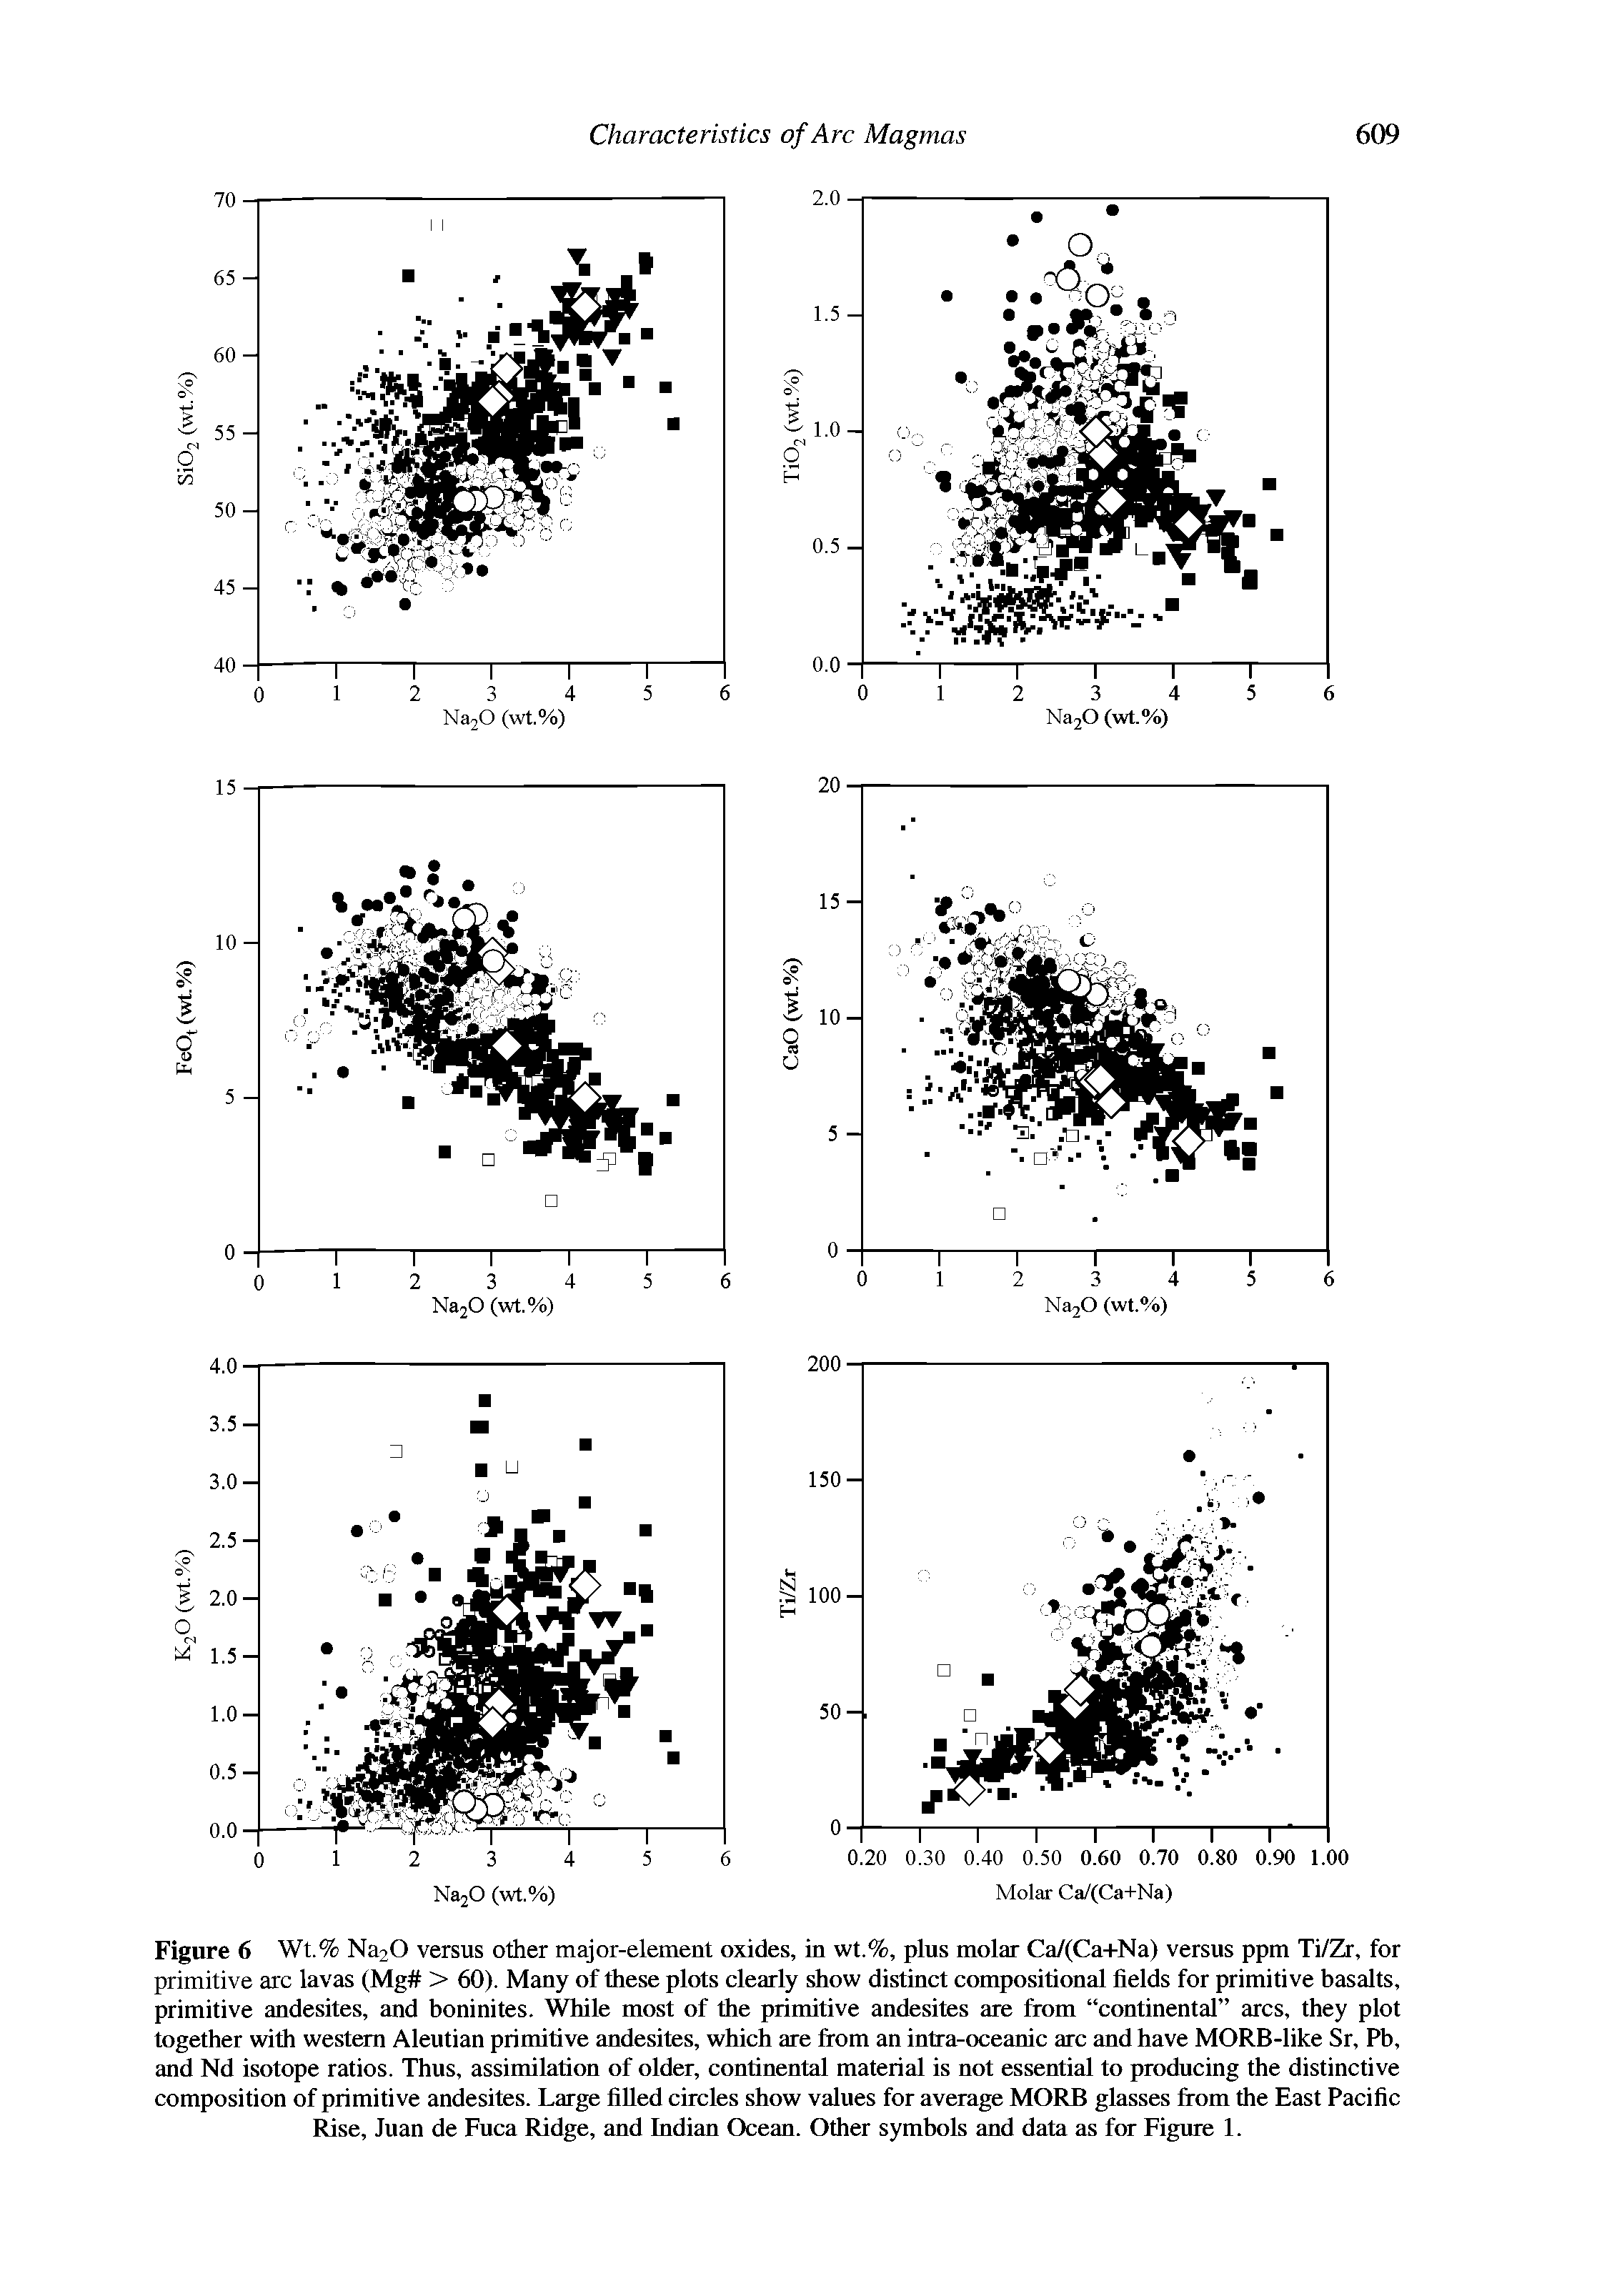 Figure 6 Wt.% Na20 versus other major-element oxides, in wt.%, plus molar Ca/(Ca+Na) versus ppm Ti/Zr, for primitive arc lavas (Mg > 60). Many of these plots clearly show distinct compositional fields for primitive basalts, primitive andesites, and boninites. While most of the primitive andesites are from continental arcs, they plot together with western Aleutian primitive andesites, which are from an intra-oceanic arc and have MORB-like Sr, Pb, and Nd isotope ratios. Thus, assimilation of older, continental material is not essential to producing the distinctive composition of primitive andesites. Large filled circles show values for average MORE glasses from the East Pacific Rise, Juan de Fuca Ridge, and Indian Ocean. Other symbols and data as for Figure 1.